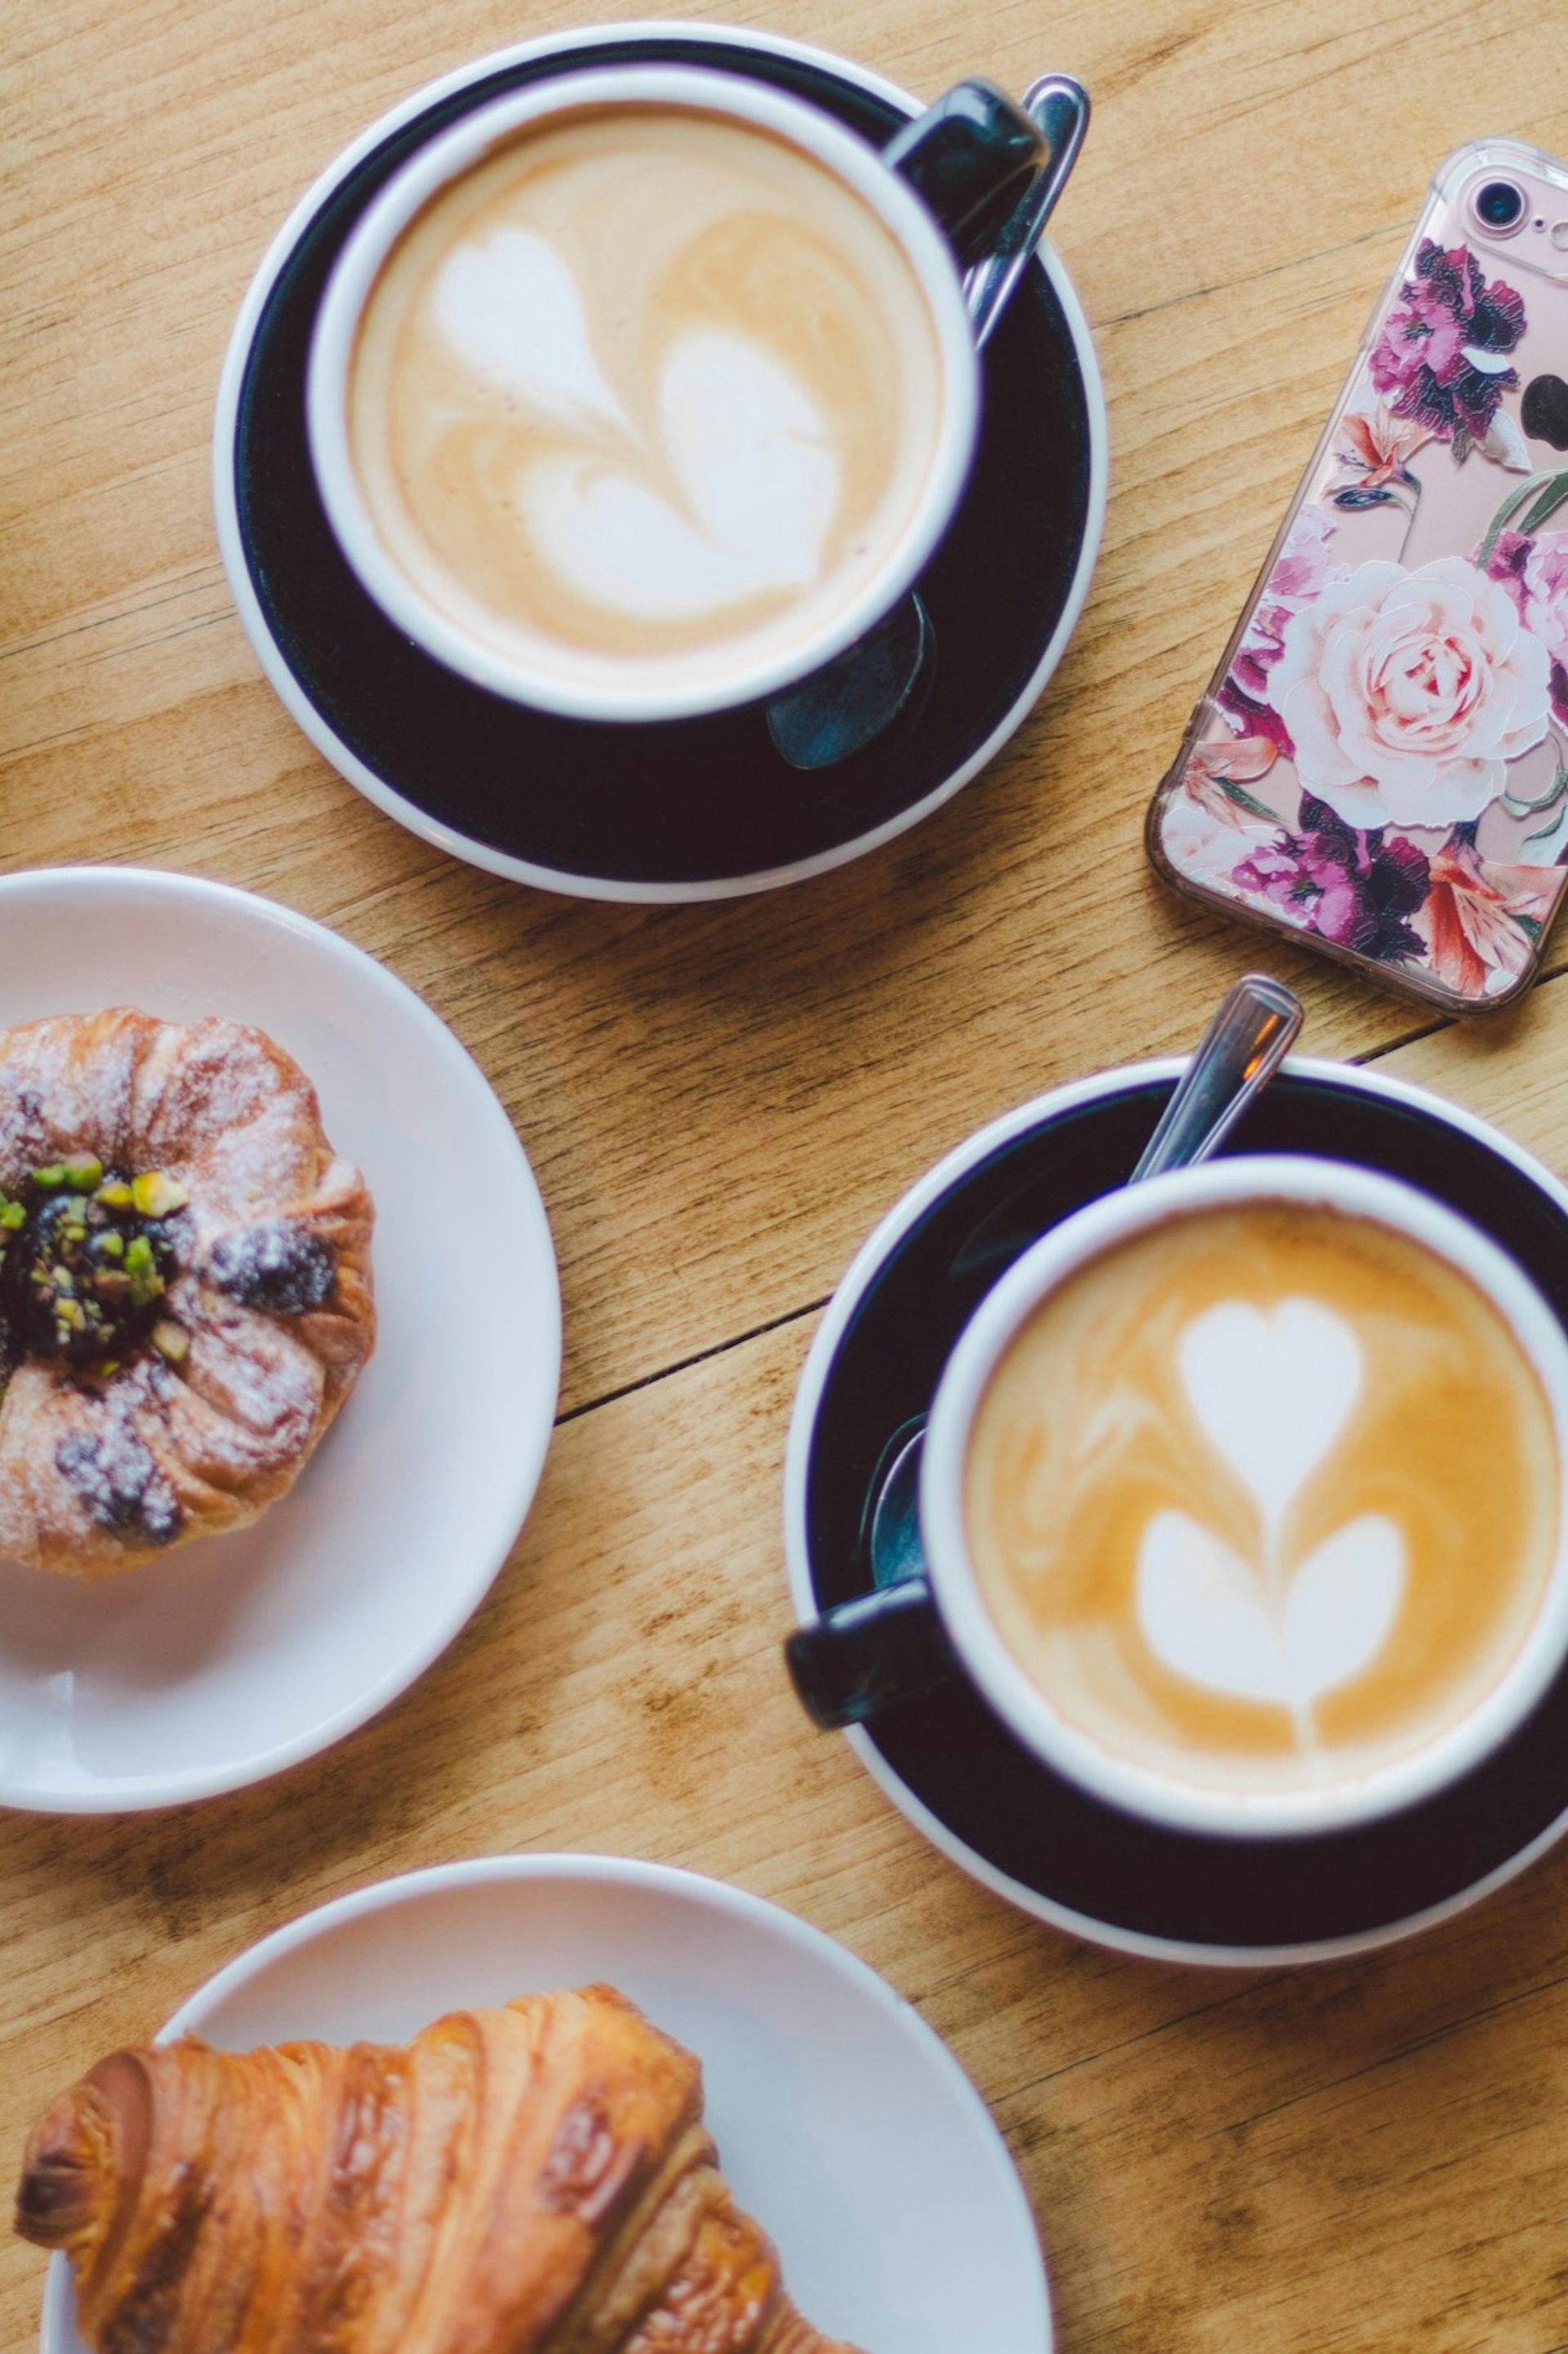 Looking down at two mugs of coffee, with several pastries on plates around © Jessica Lam / Lonely Planet